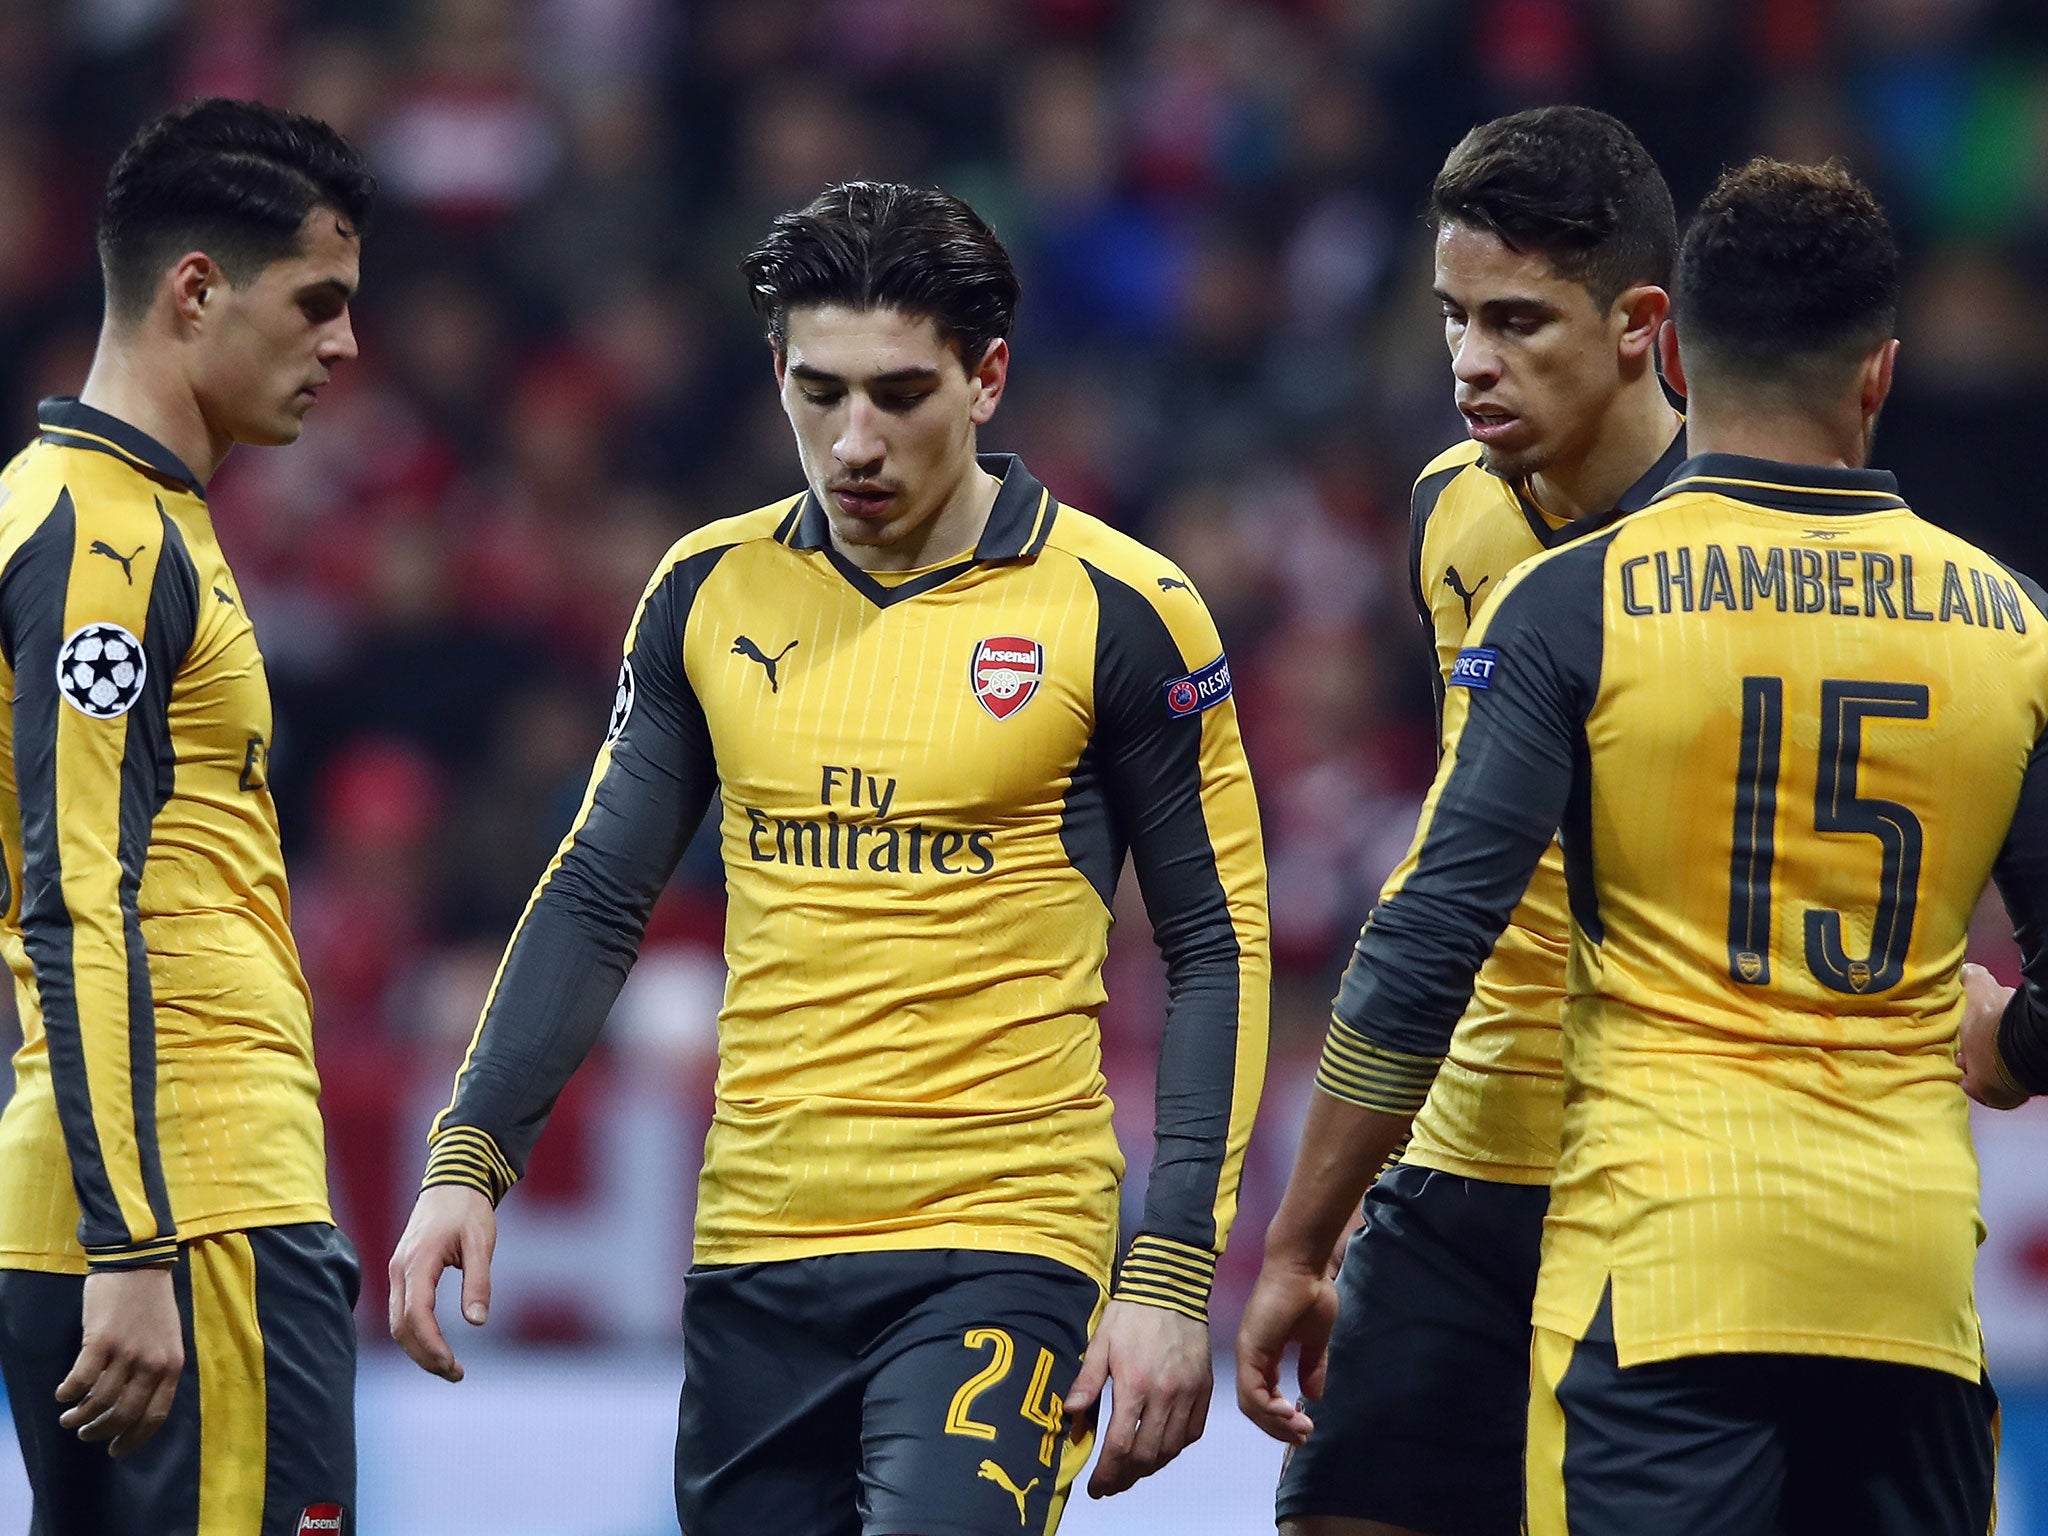 Arsenal's players are in need of new direction